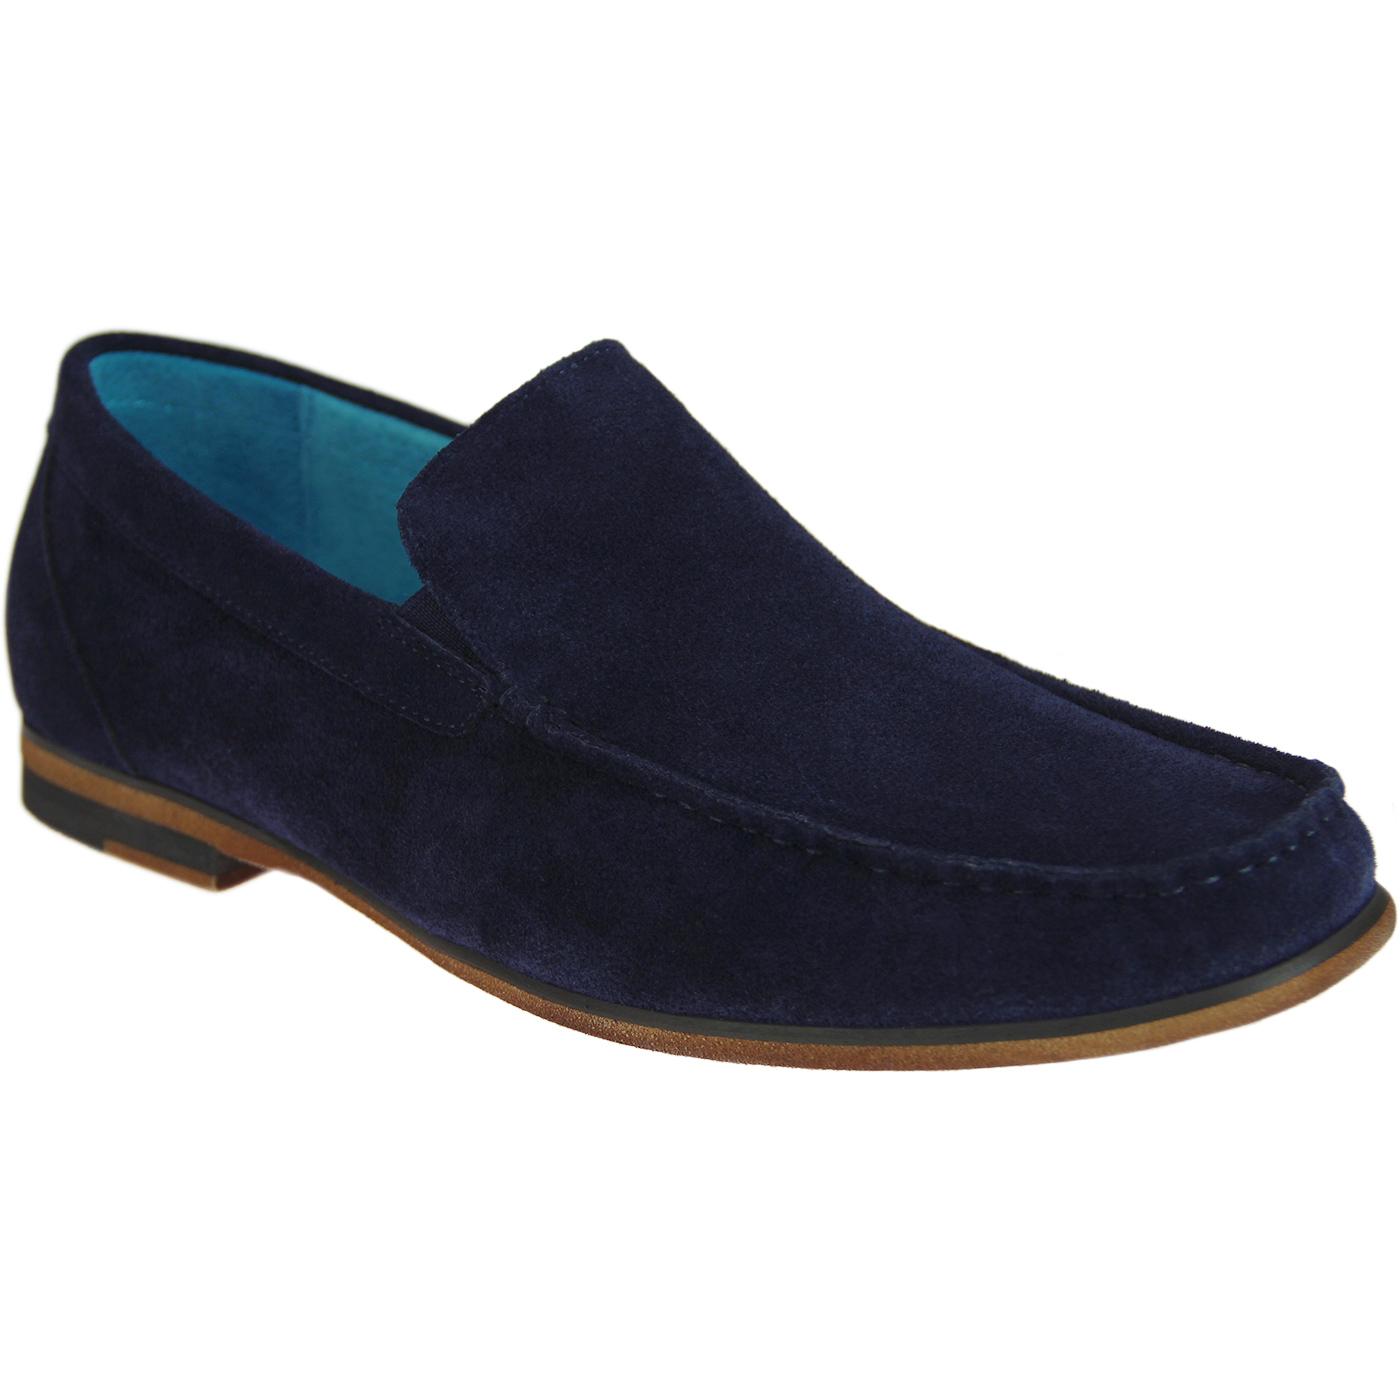 PAOLO VANDINI Alec Retro Mod Slip On Suede Loafers in Navy